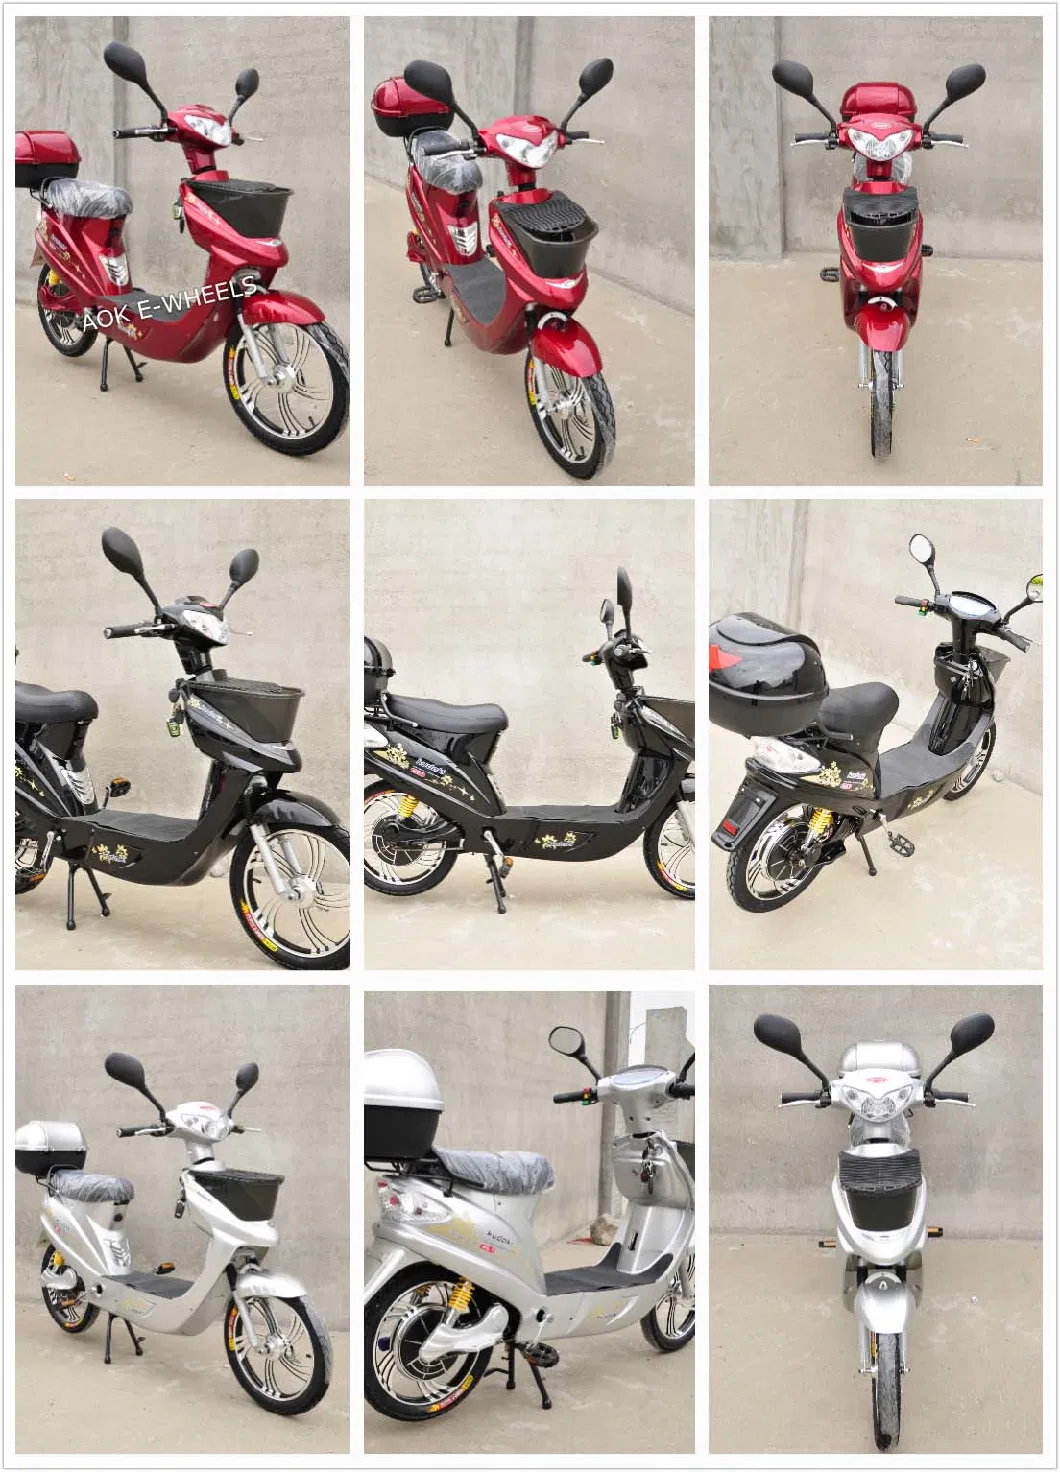 200W~500W 36V/48V Electric Bicycle with Lead-Acid Battery